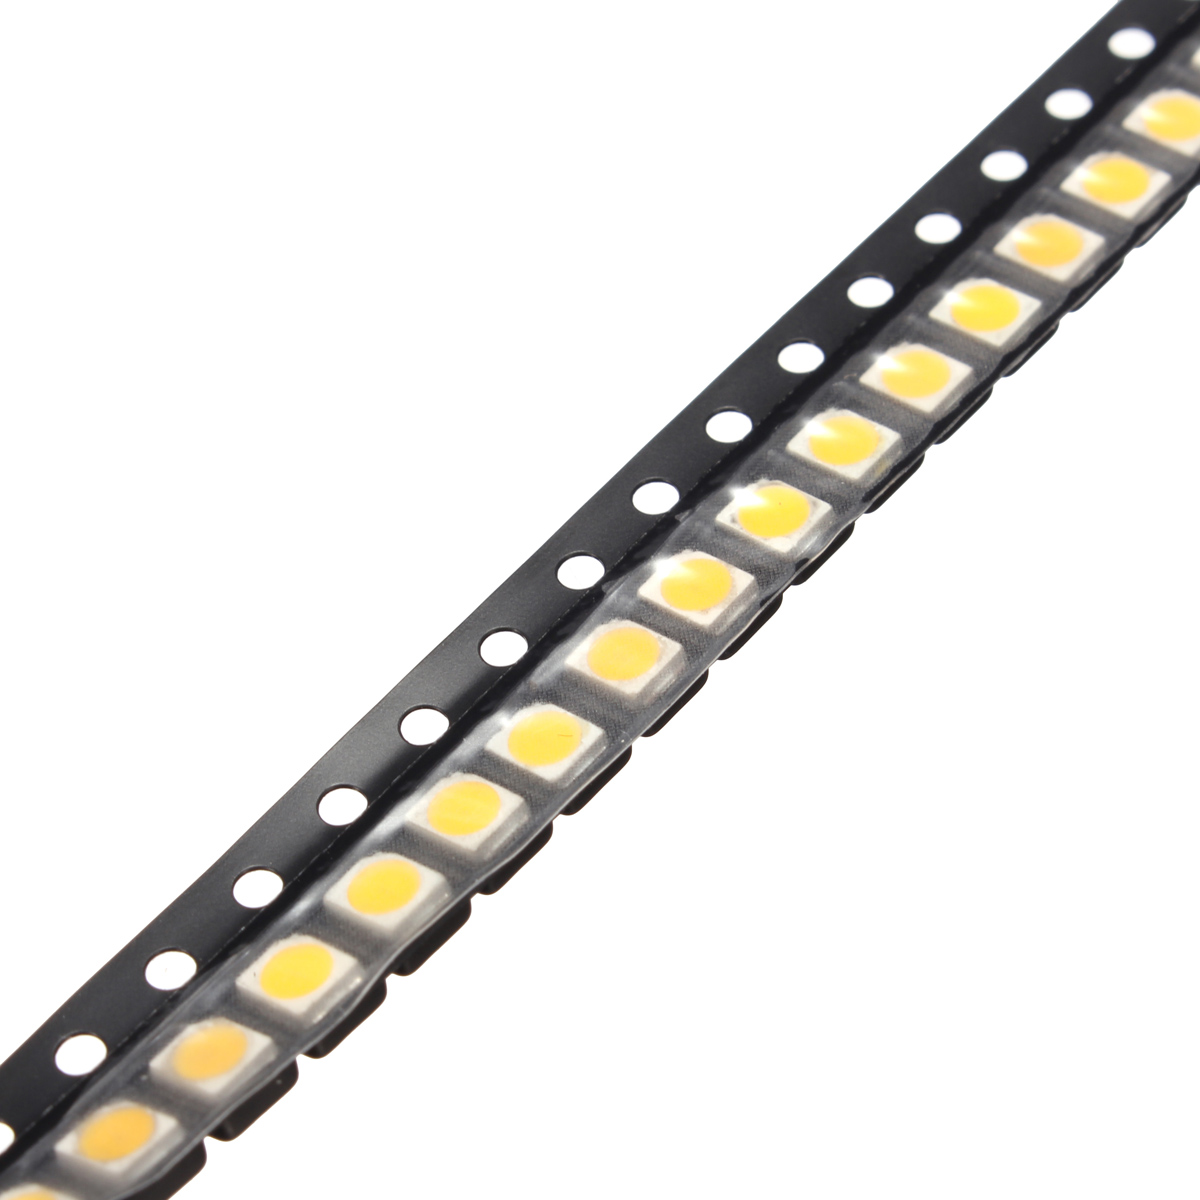 100PCS-SMD3528-1210-1W-100LM-Warm-White-LED-Backlight-DIY-Chip-Bead-For-TV-Application-1128676-2